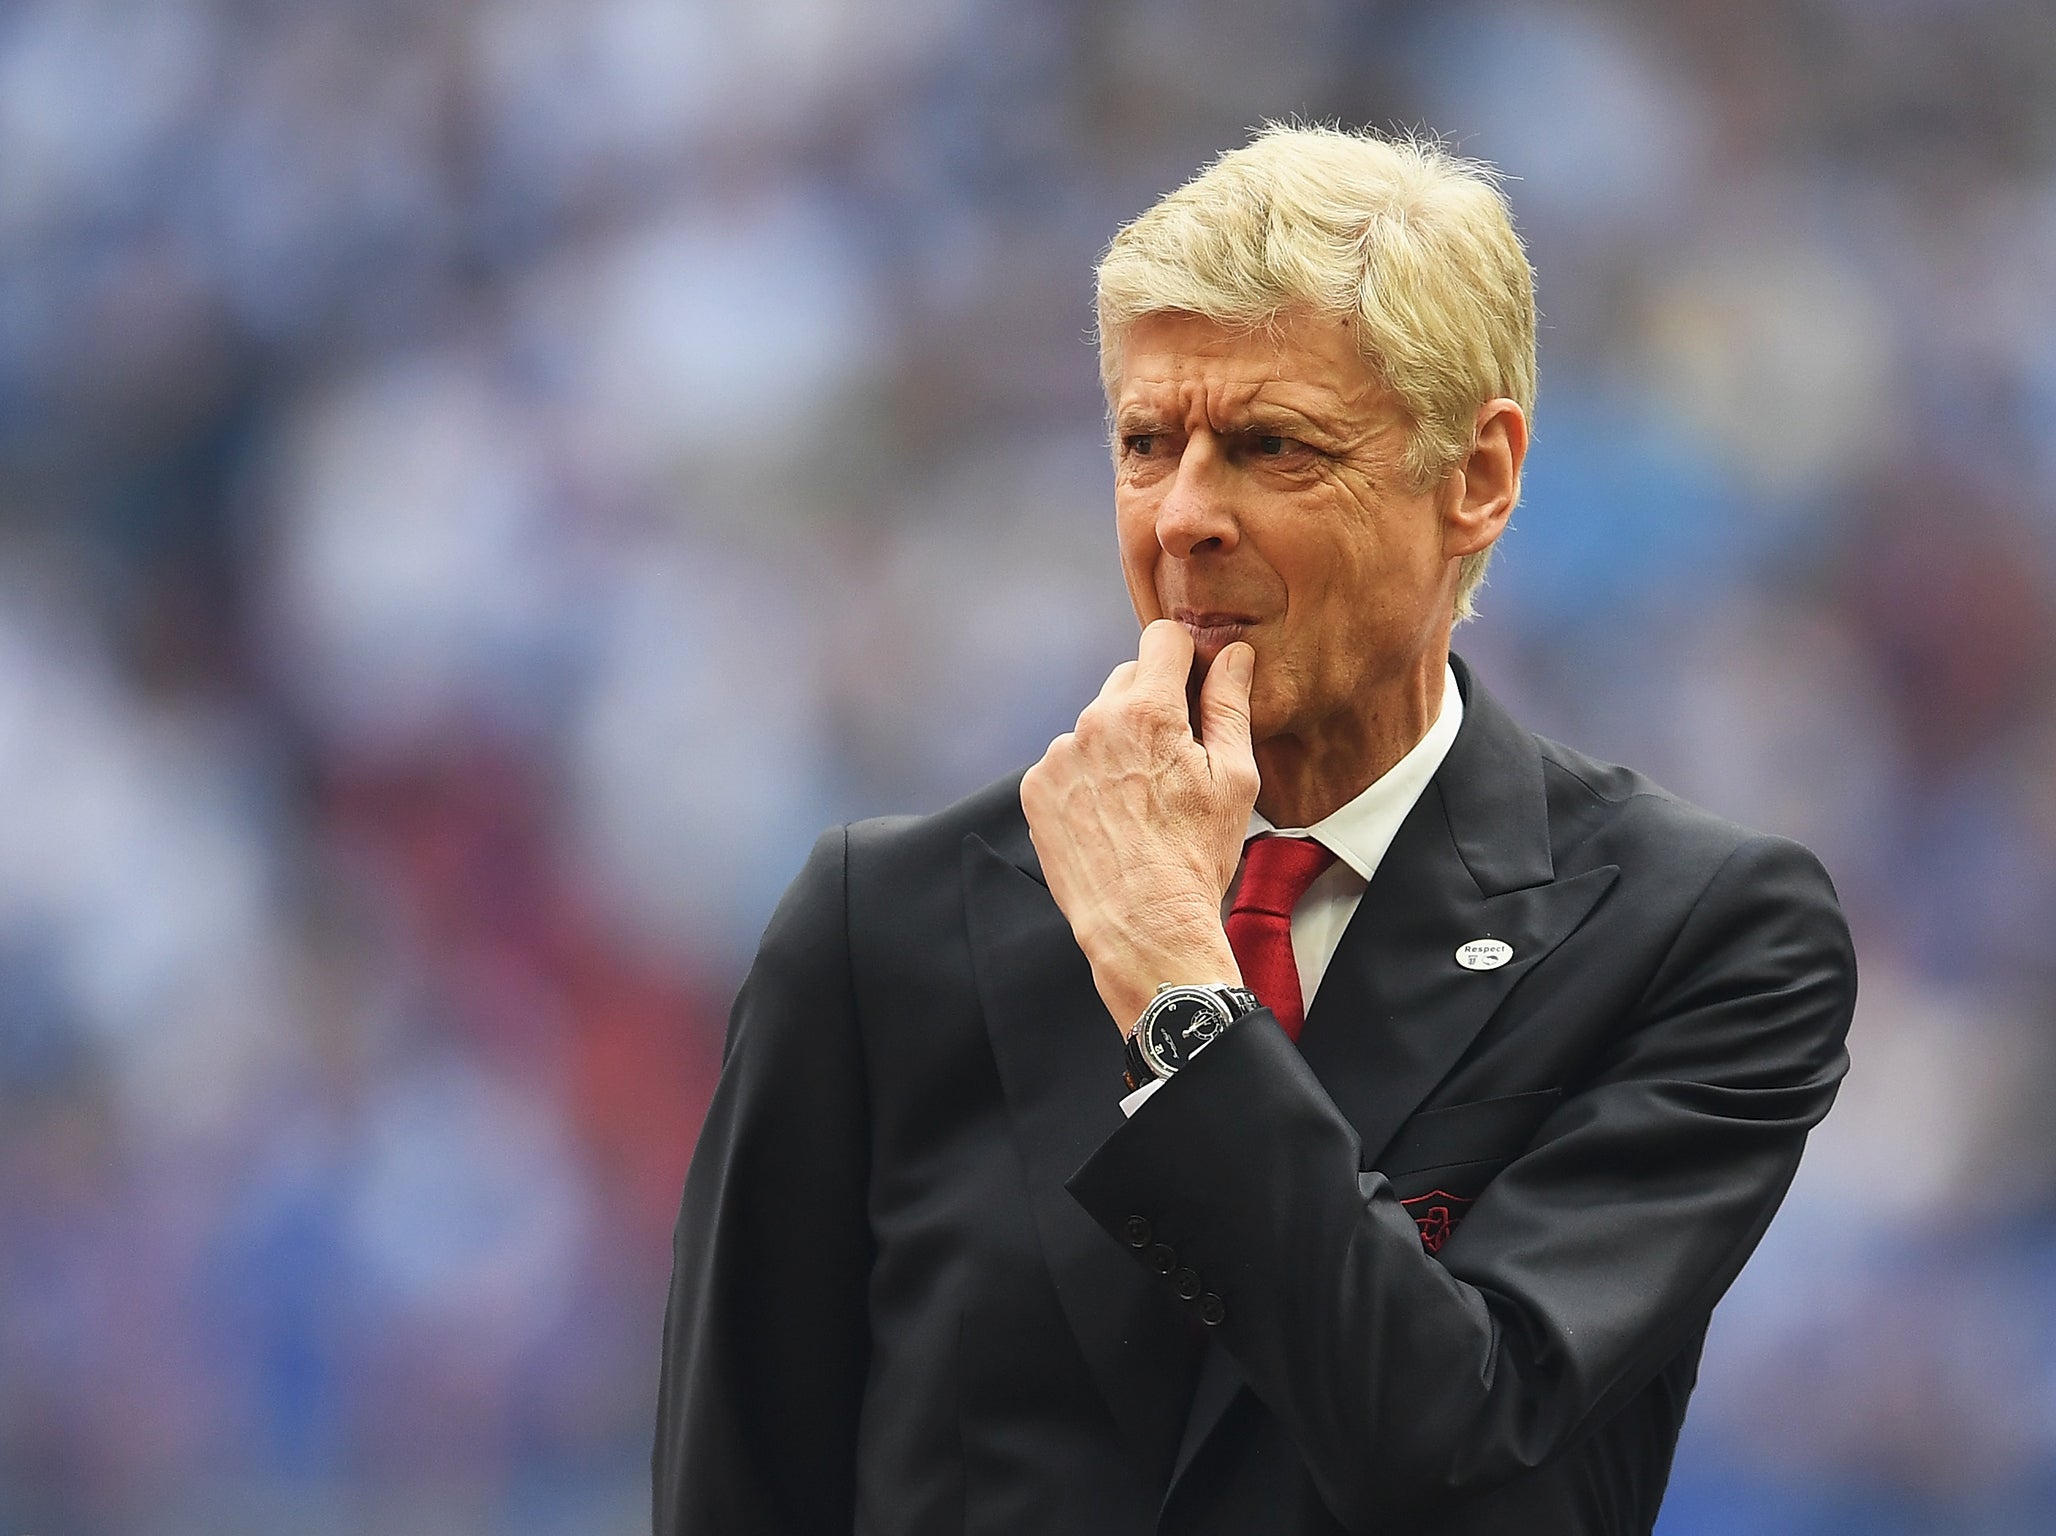 The Arsenal manager has spoken out over his future